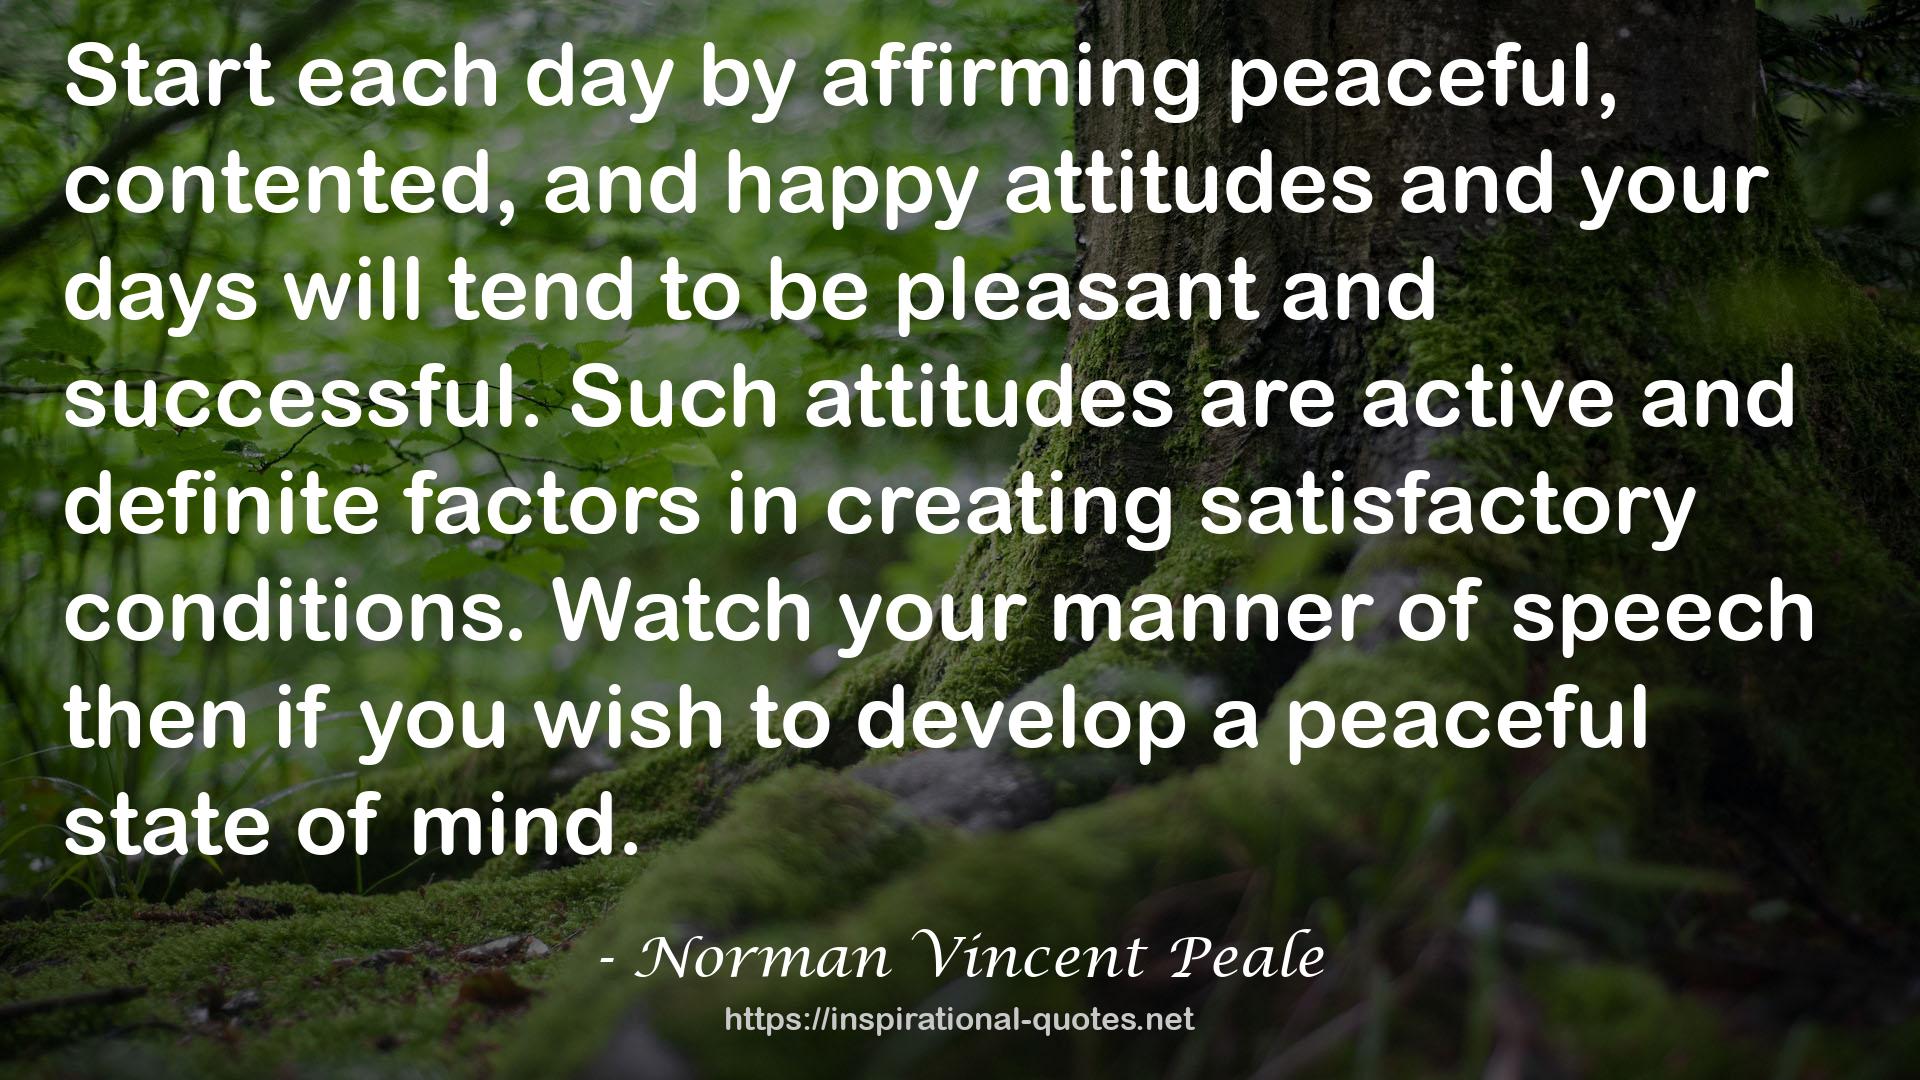 peaceful, contented, and happy attitudes  QUOTES